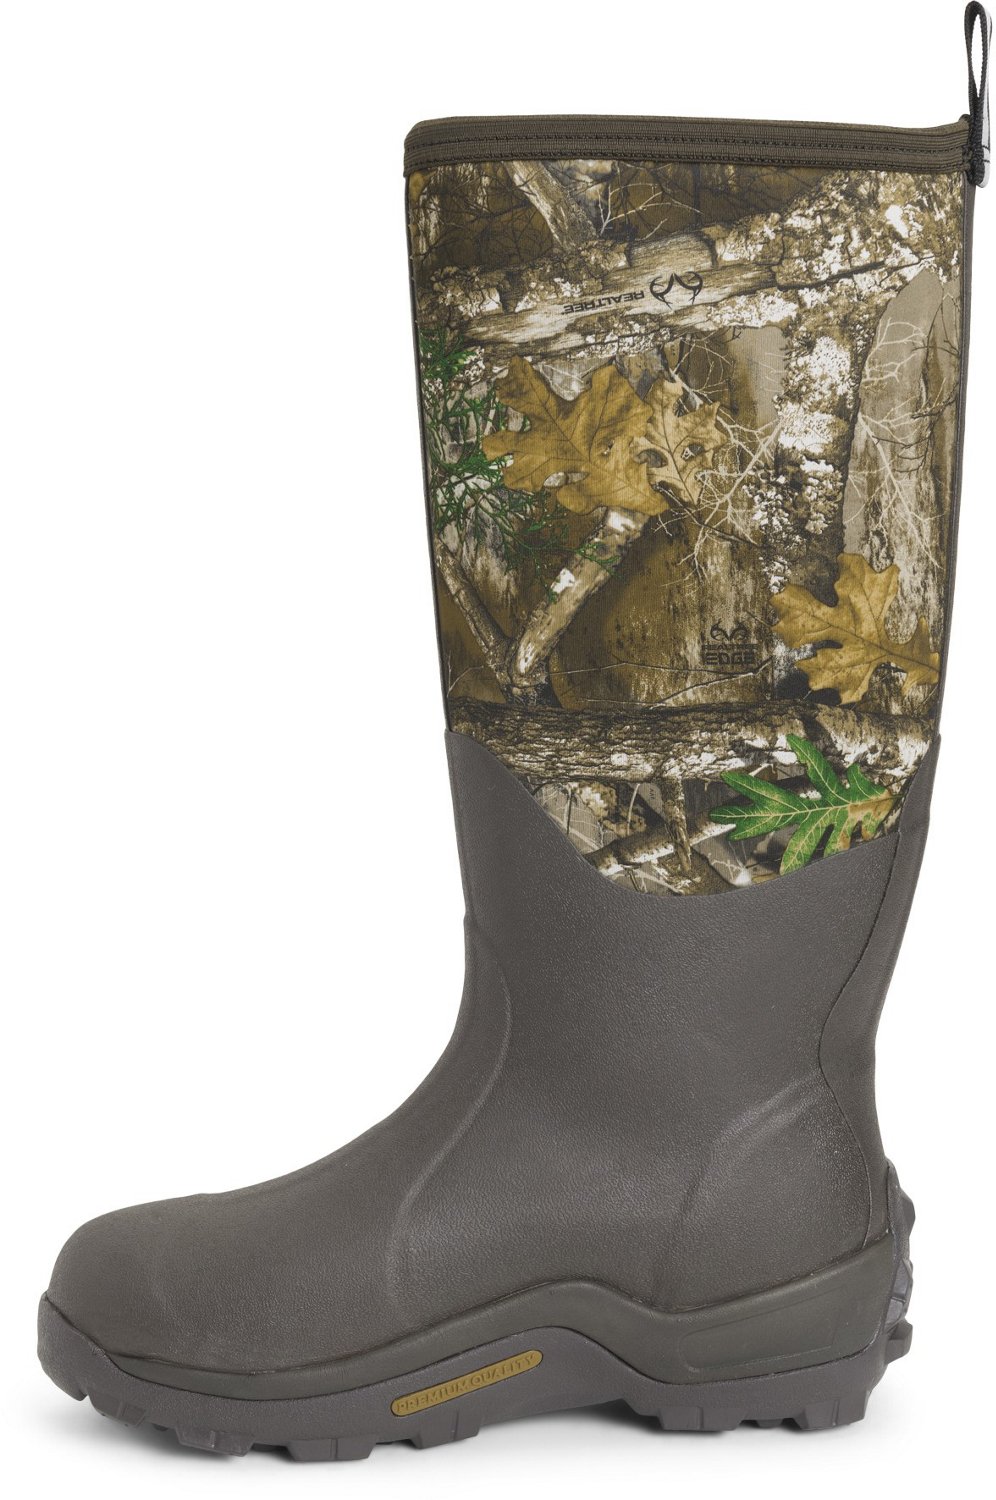 Muck Boot Men's Woody Max Country Realtree Edge Waterproof Camo Boots ...